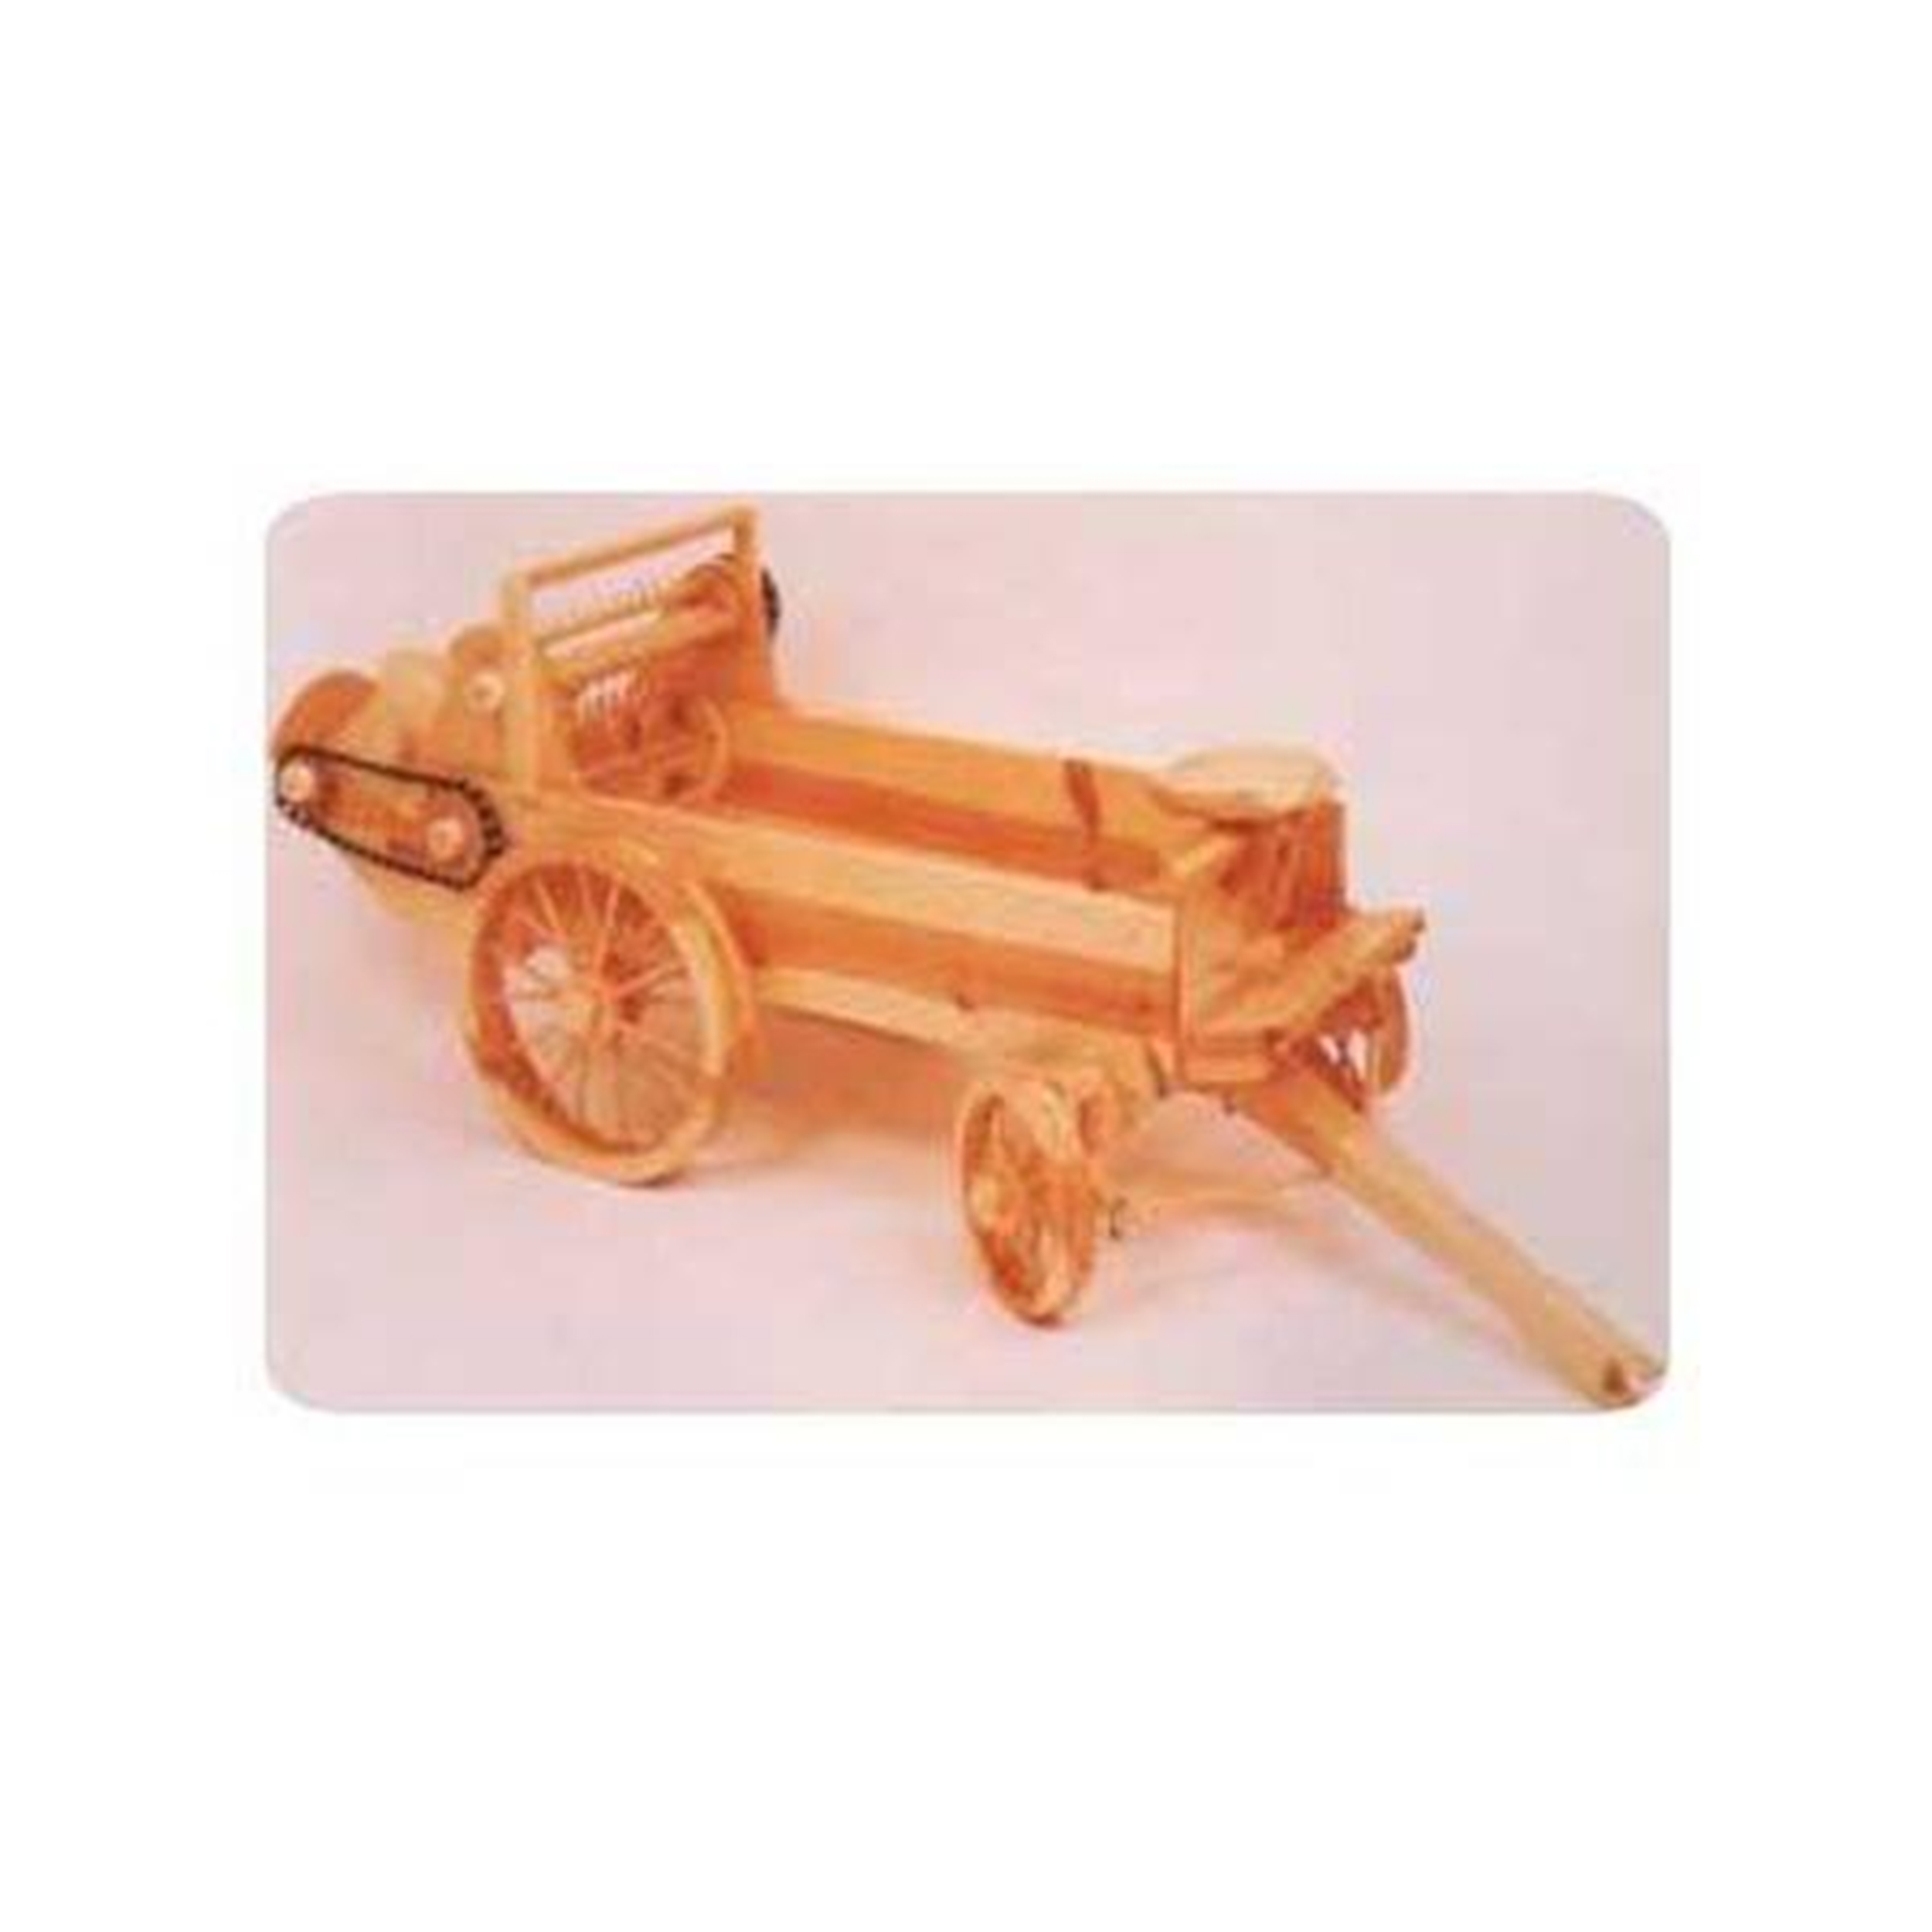 Woodworking Project Paper Plan To Build Manure Spreader